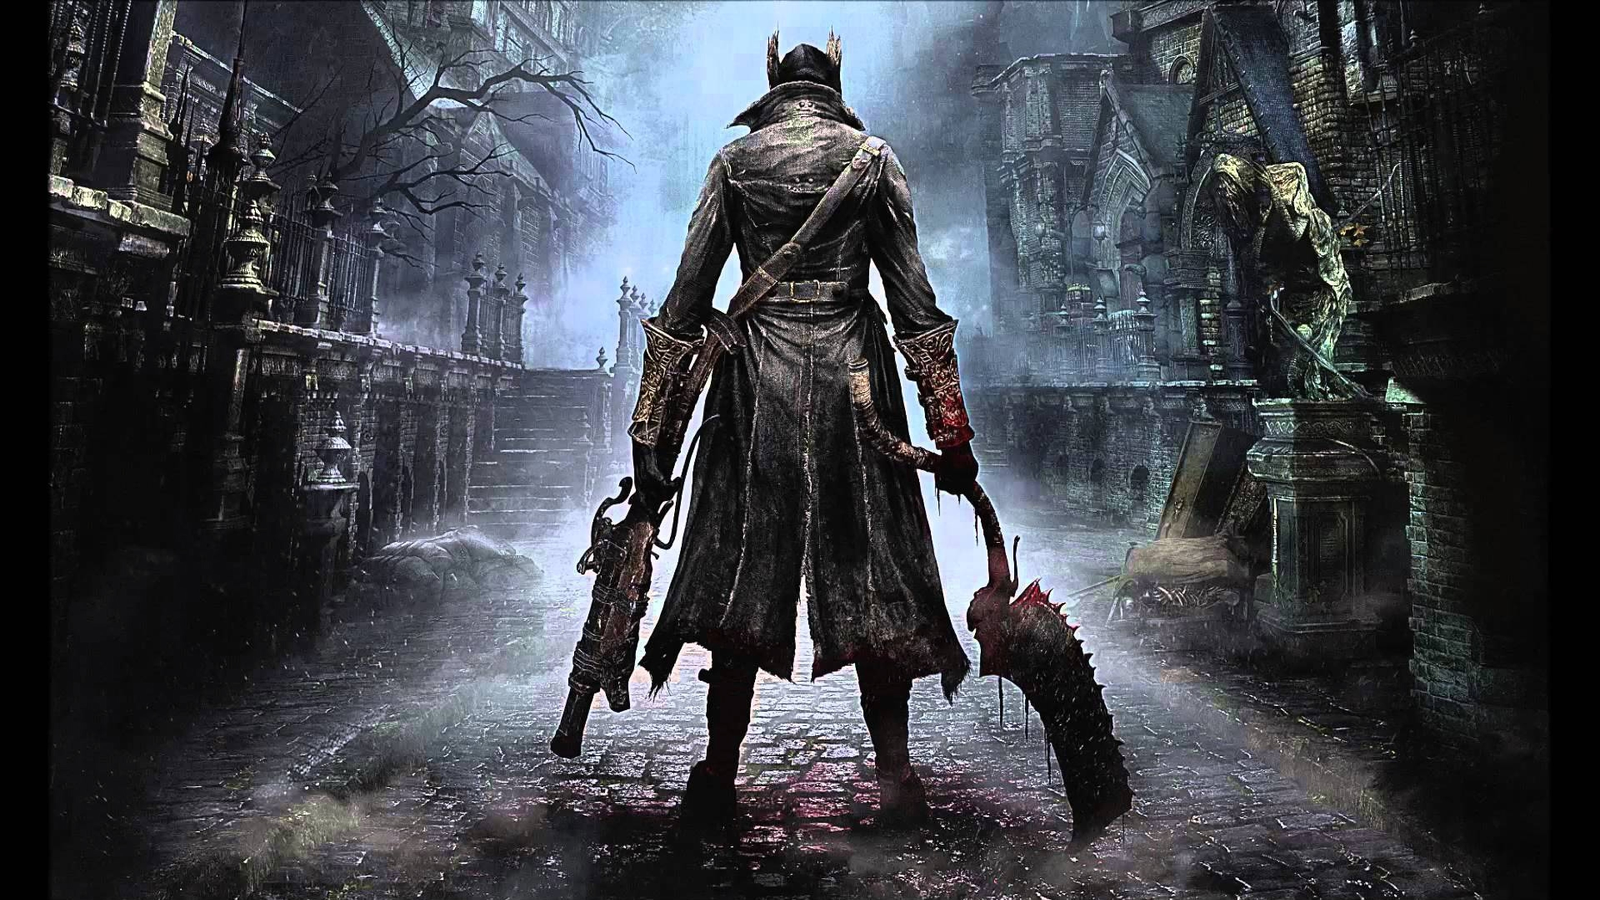 PS4-exclusive Bloodborne updated for PlayStation 5: All the